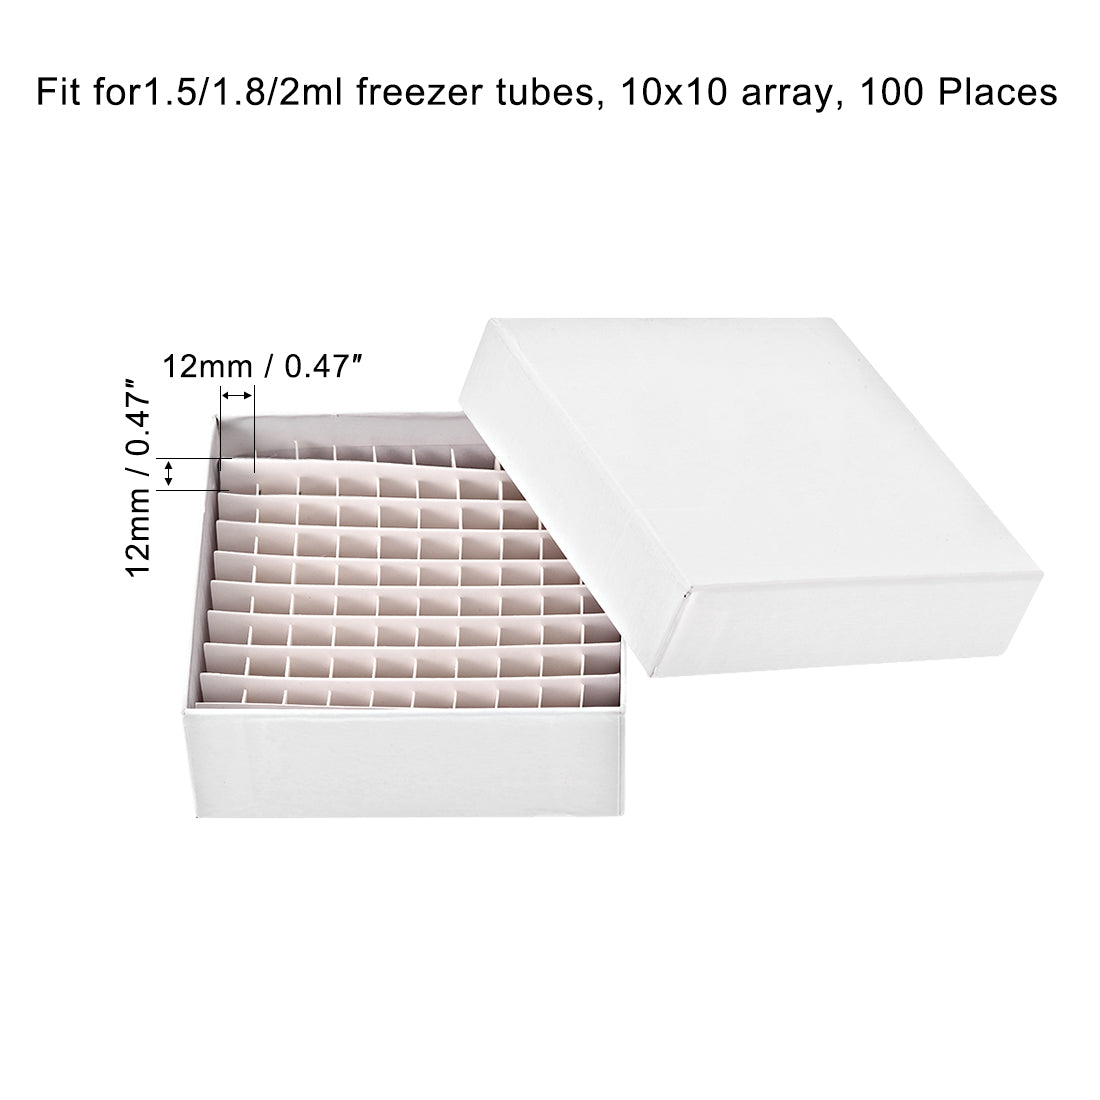 uxcell Uxcell Freezer Tube Box 100 Places Cardboard Holder Rack for 1.5/1.8/2ml Microcentrifuge Tubes 2Pcs